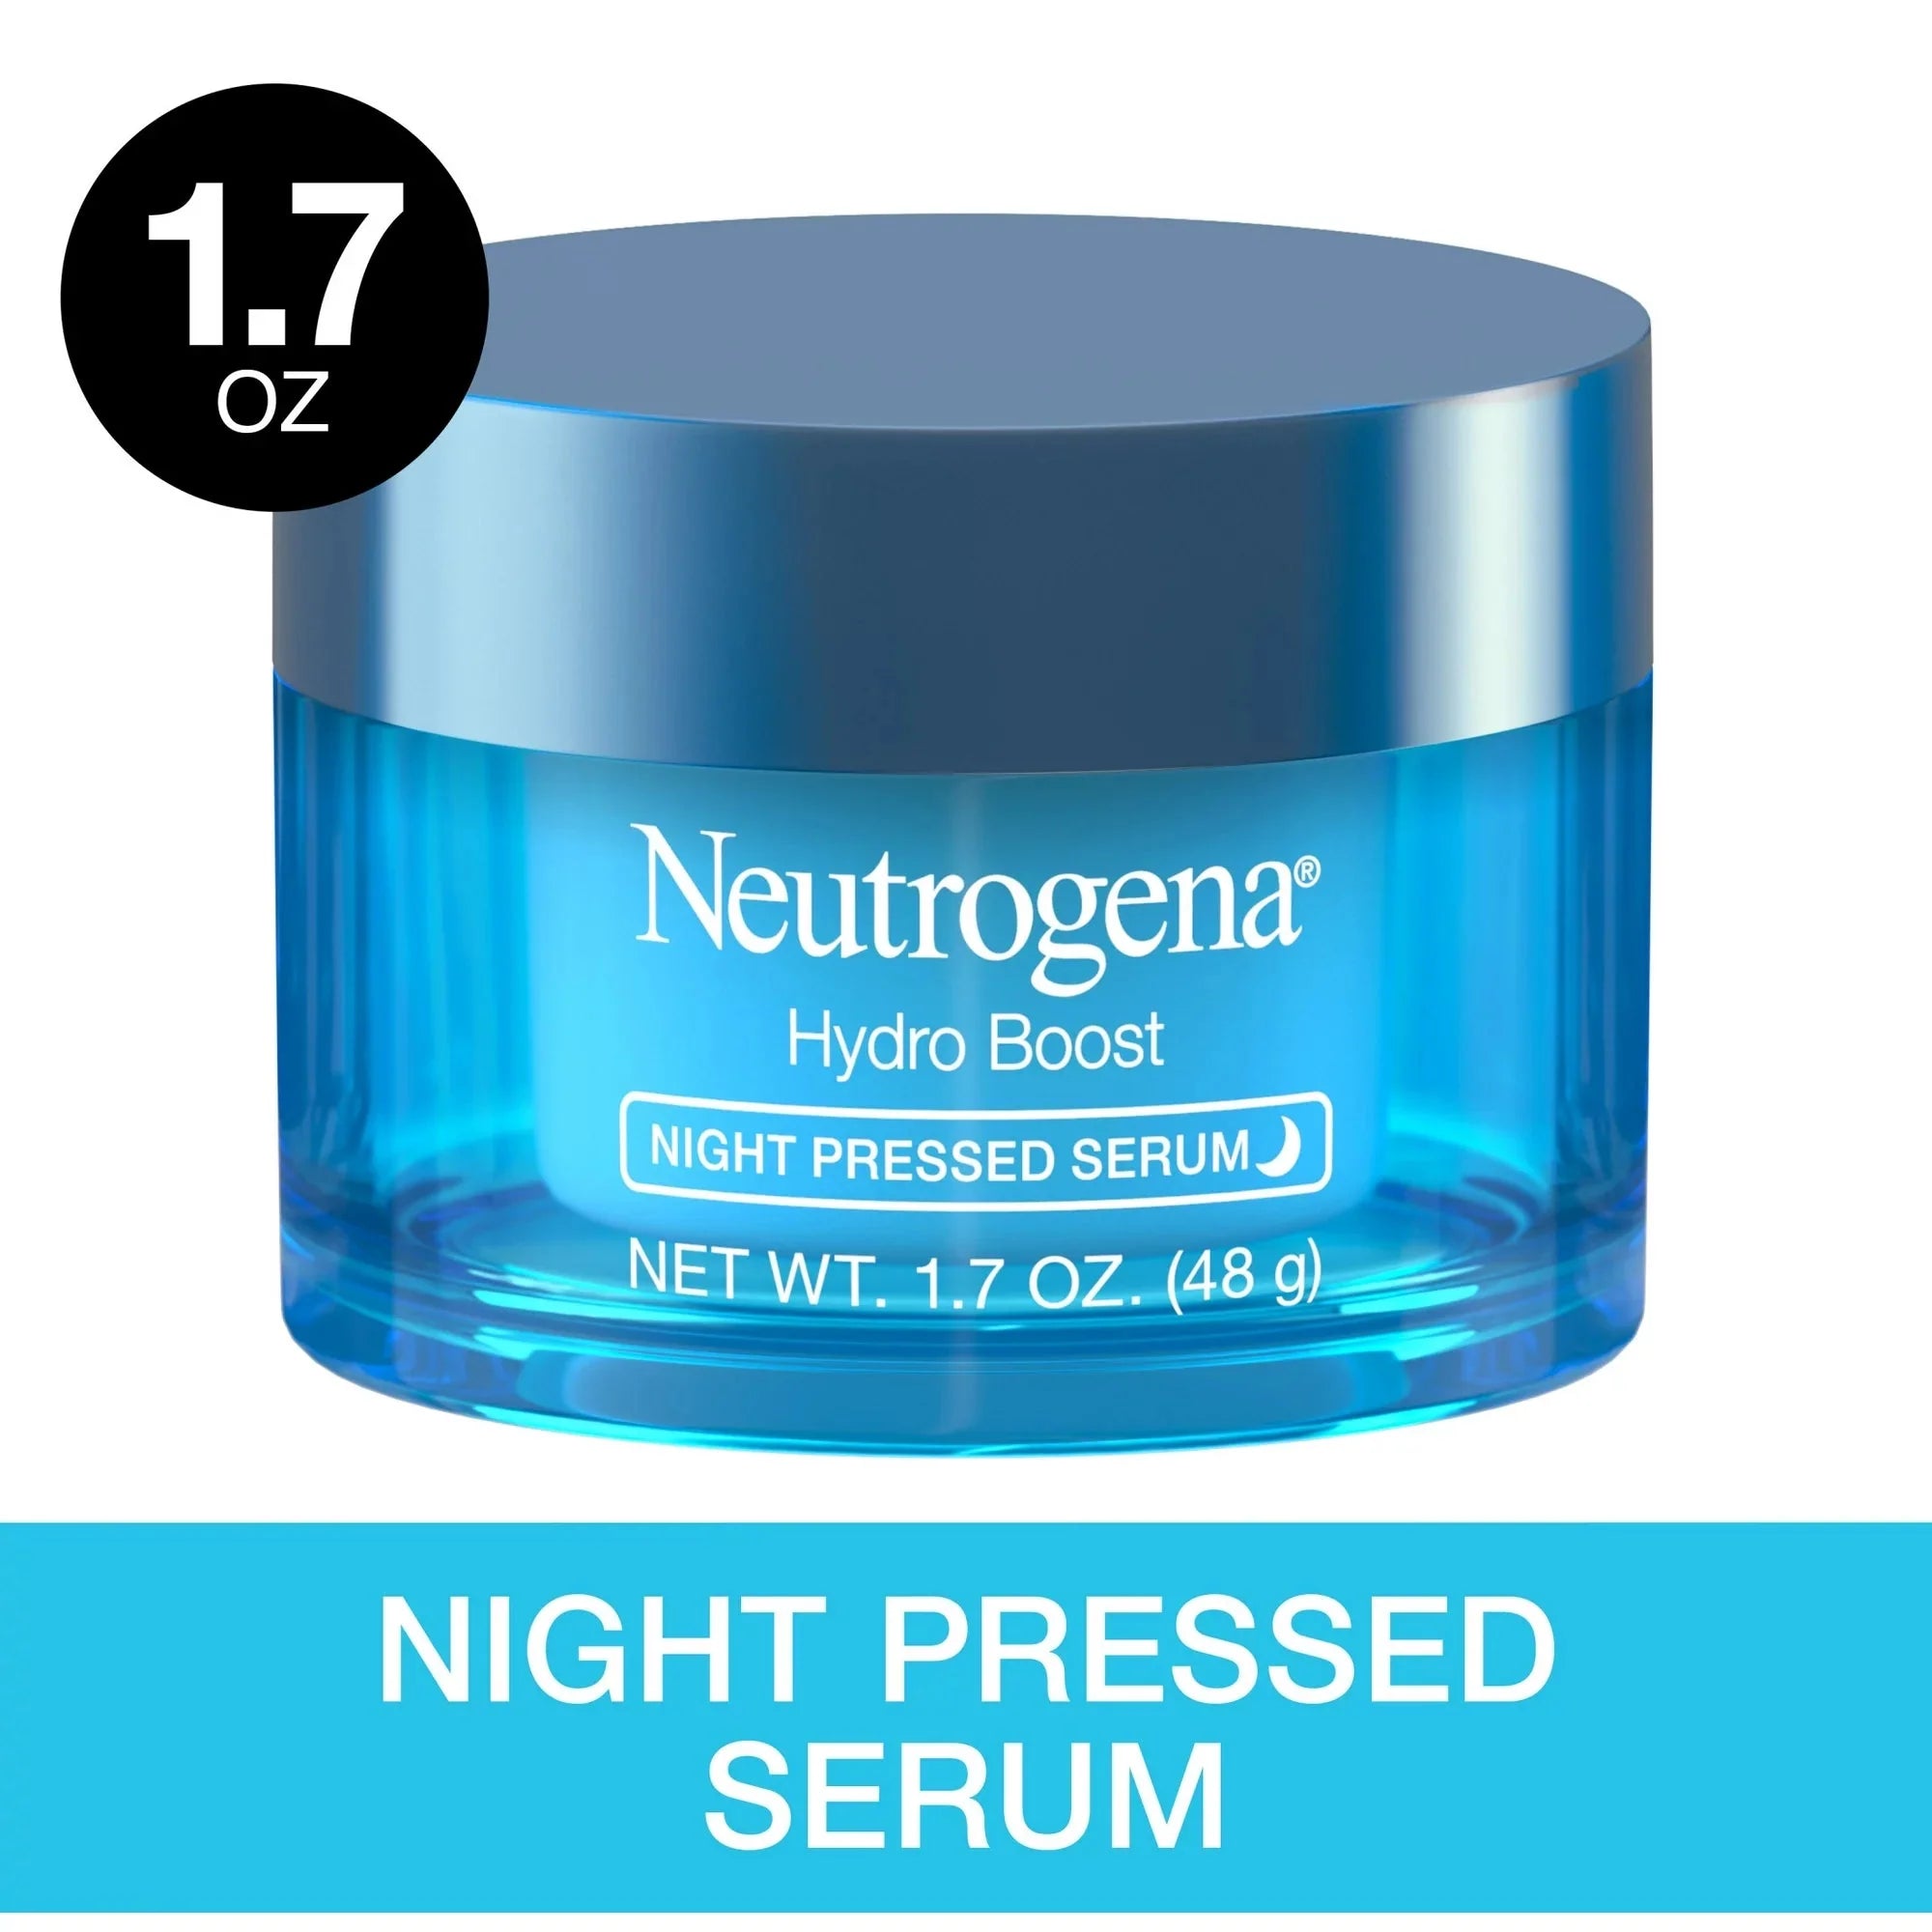 Wholesale prices with free shipping all over United States Neutrogena Hydro Boost Hyaluronic Acid Pressed Night Serum, 1.7 oz - Steven Deals